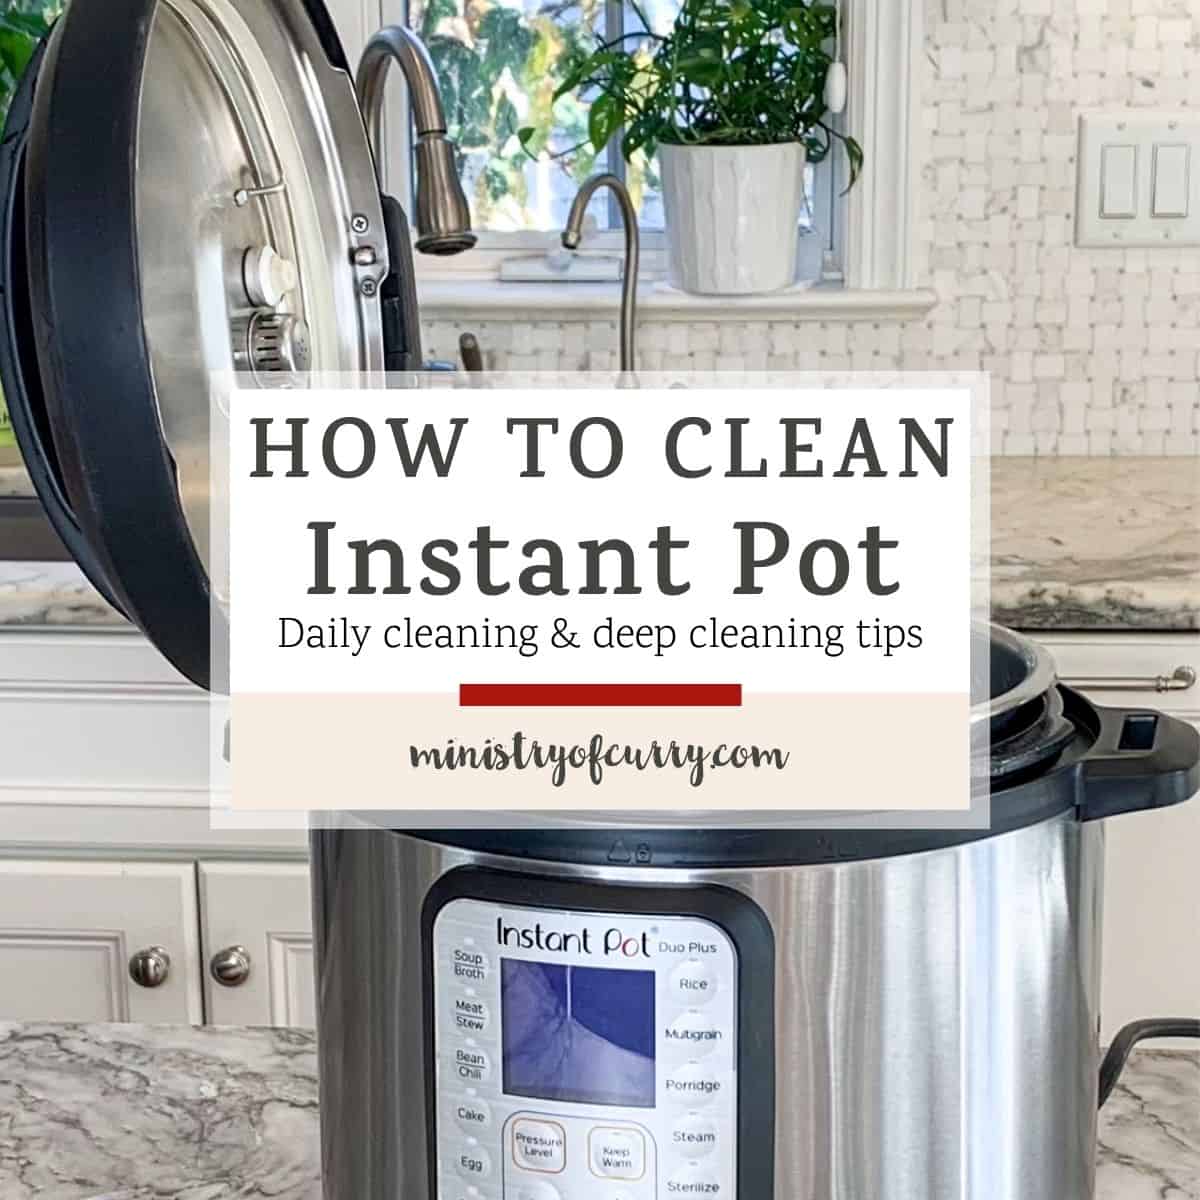 how to clean an Instant Pot